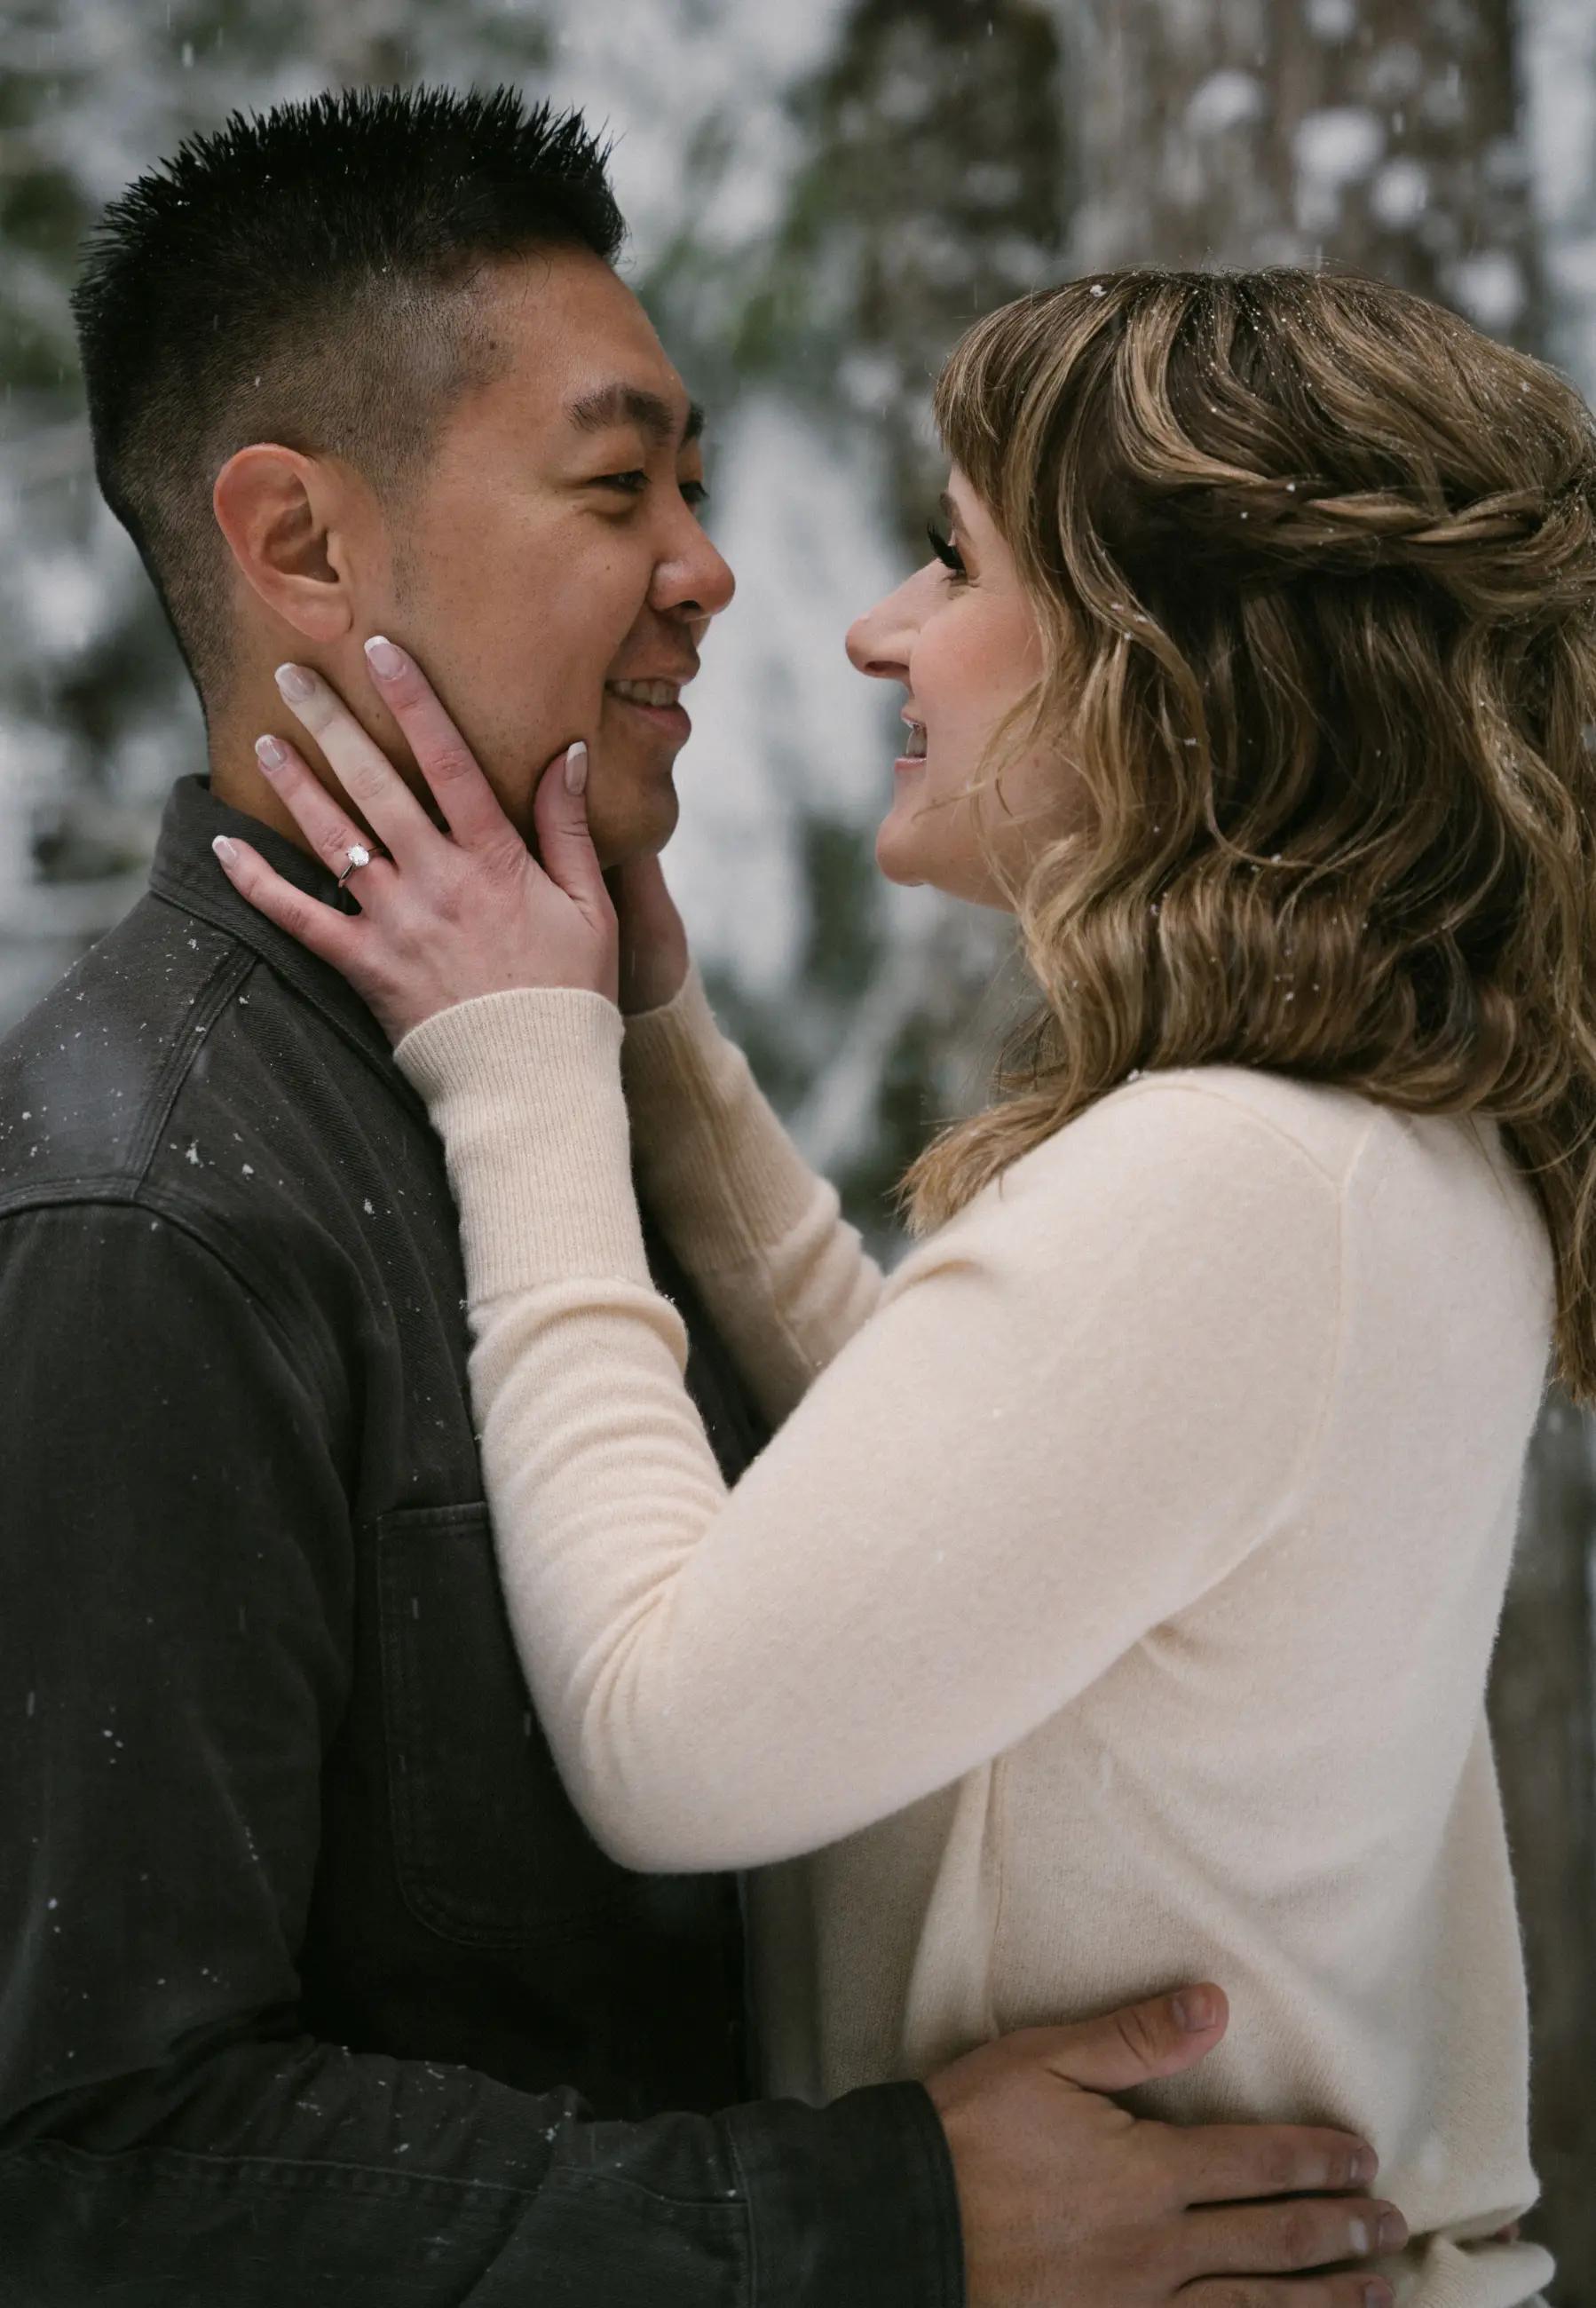 Photo of couple engagement in a snowy background